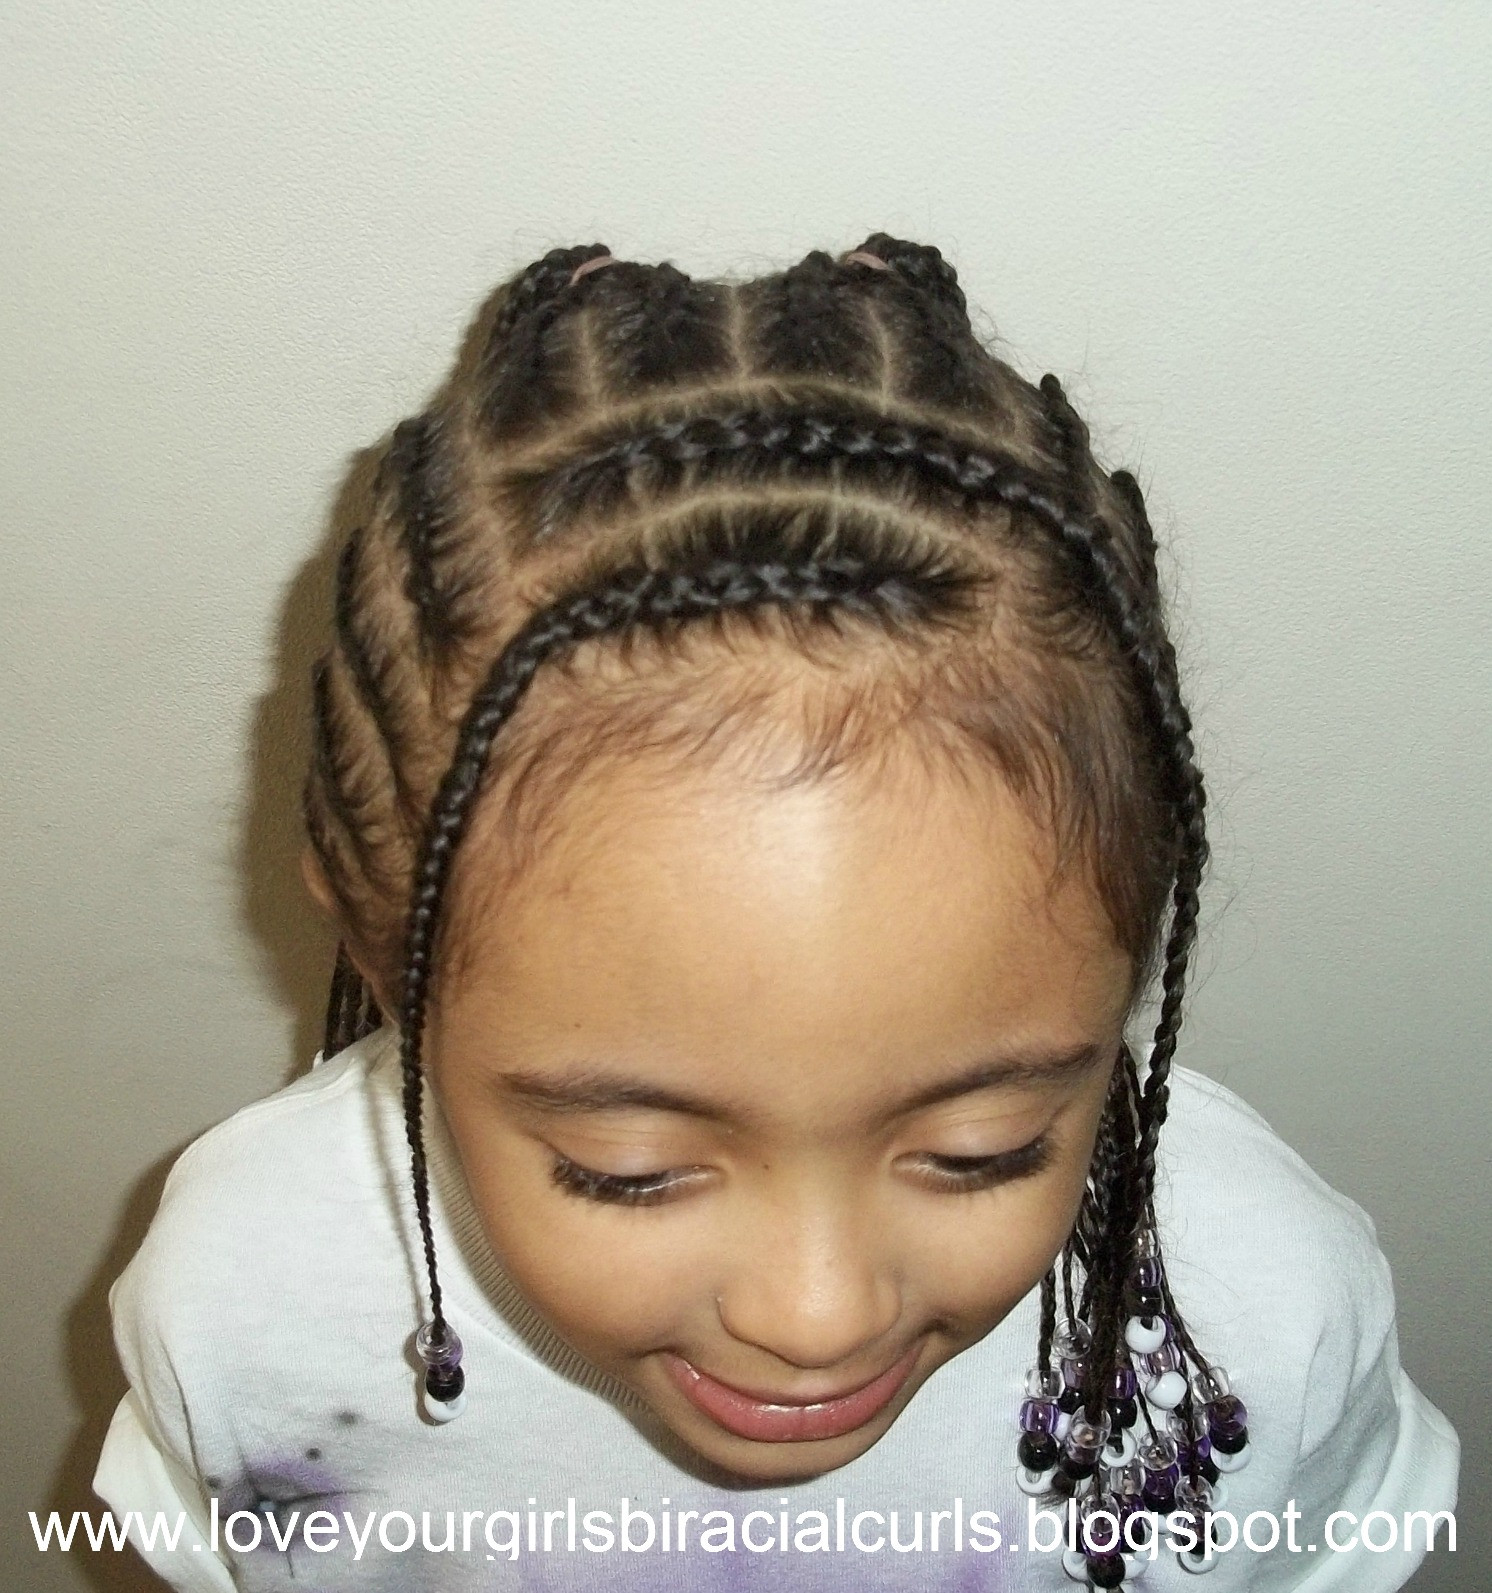 Biracial Little Girl Hairstyles
 Love Your Girls Biracial Curls Diva R s Hairstyle from Pretty Brown Girl s Showcase